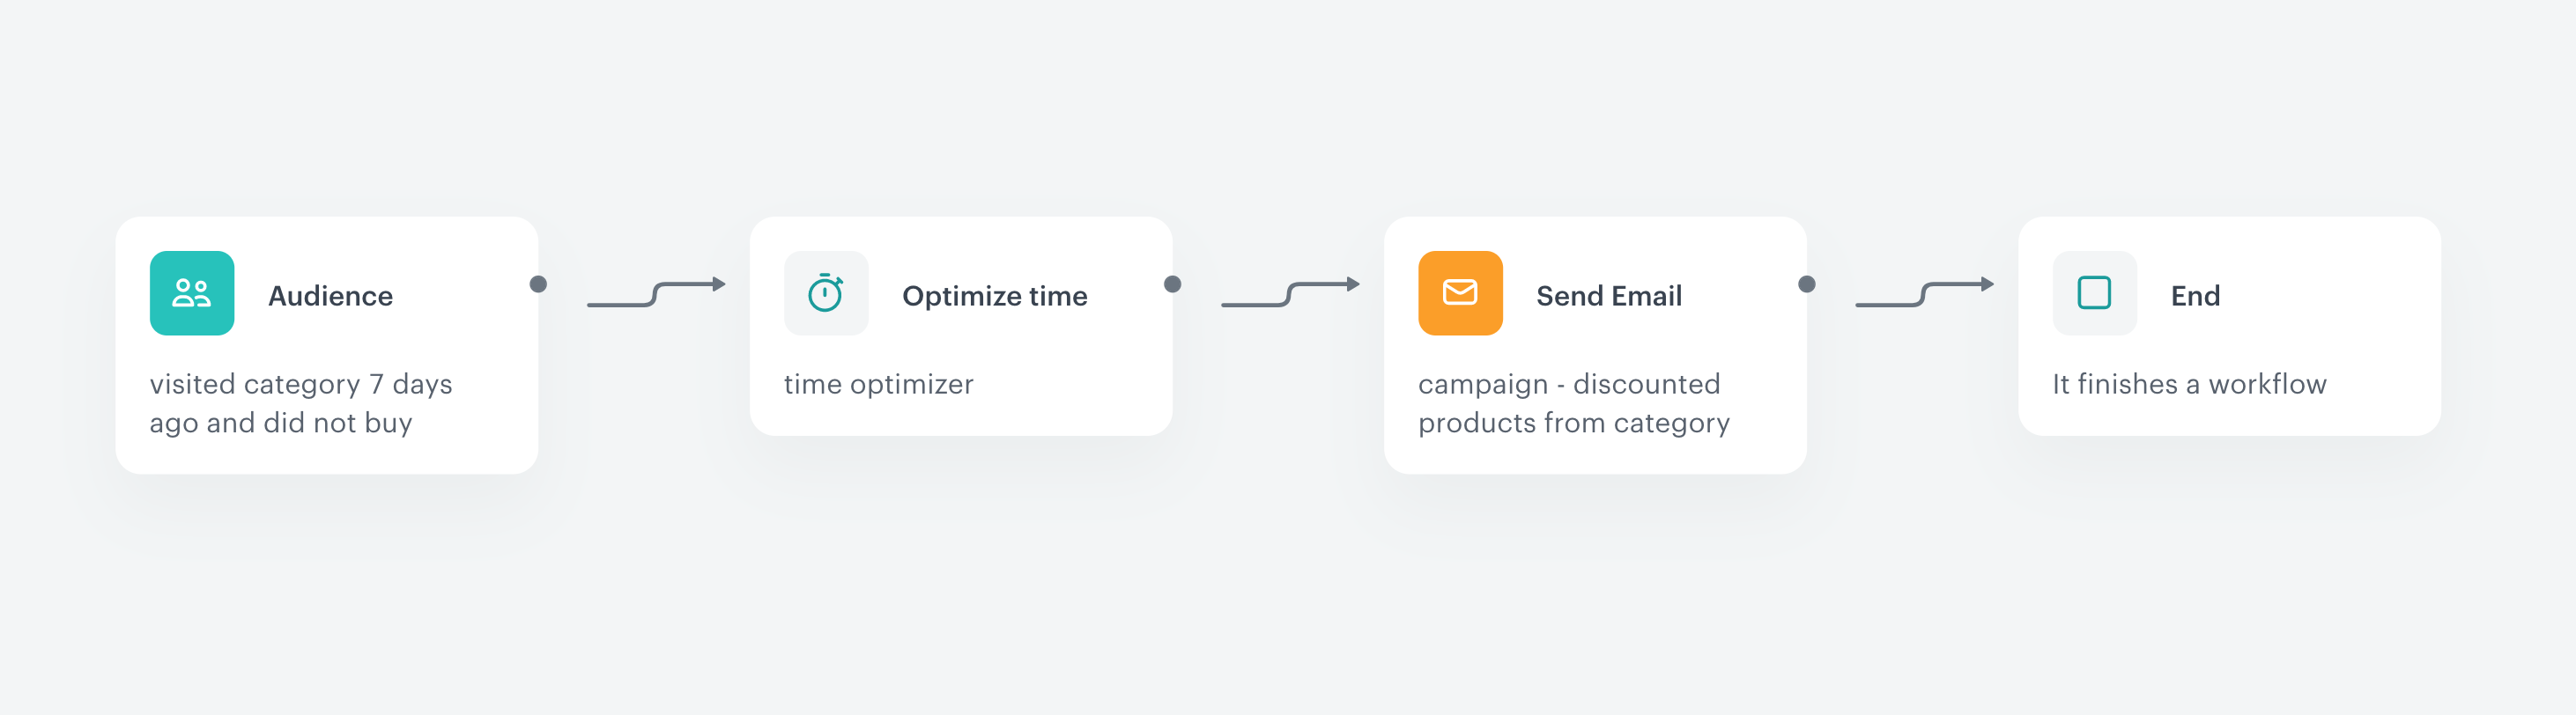 Example configuration of the workflow with the Optimize time node followed by the Send Email node